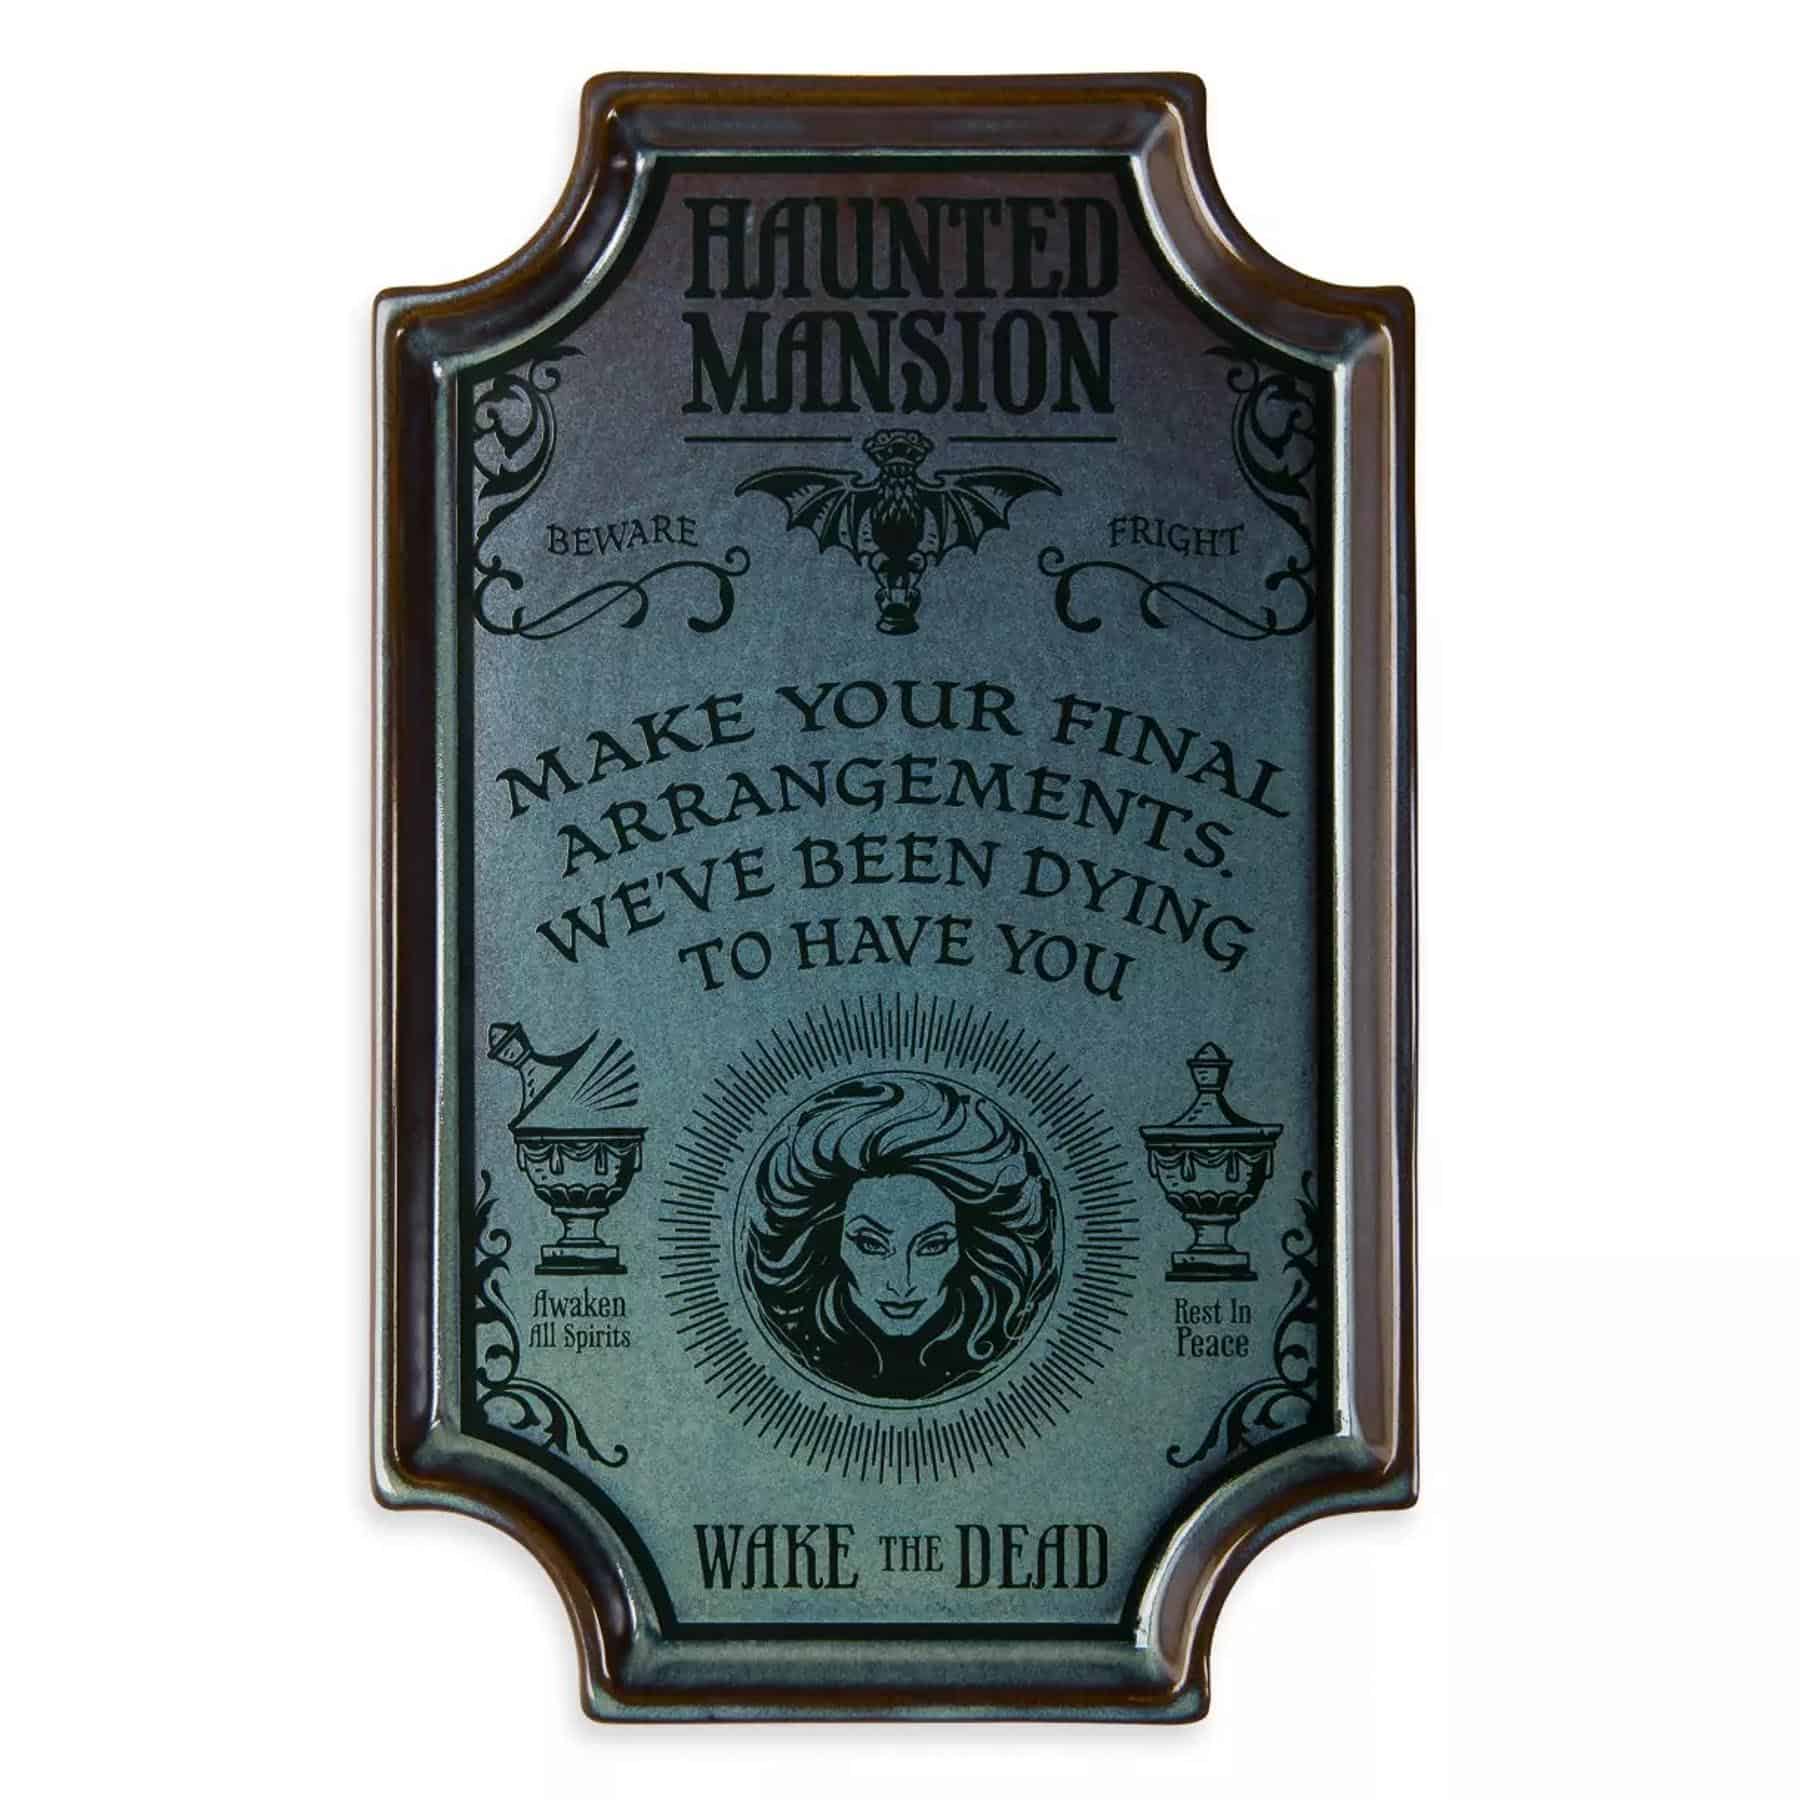 Porcelain Tray that says Haunted Mansion, Make Your Final Arrangements, We've Been Dying to Meet You